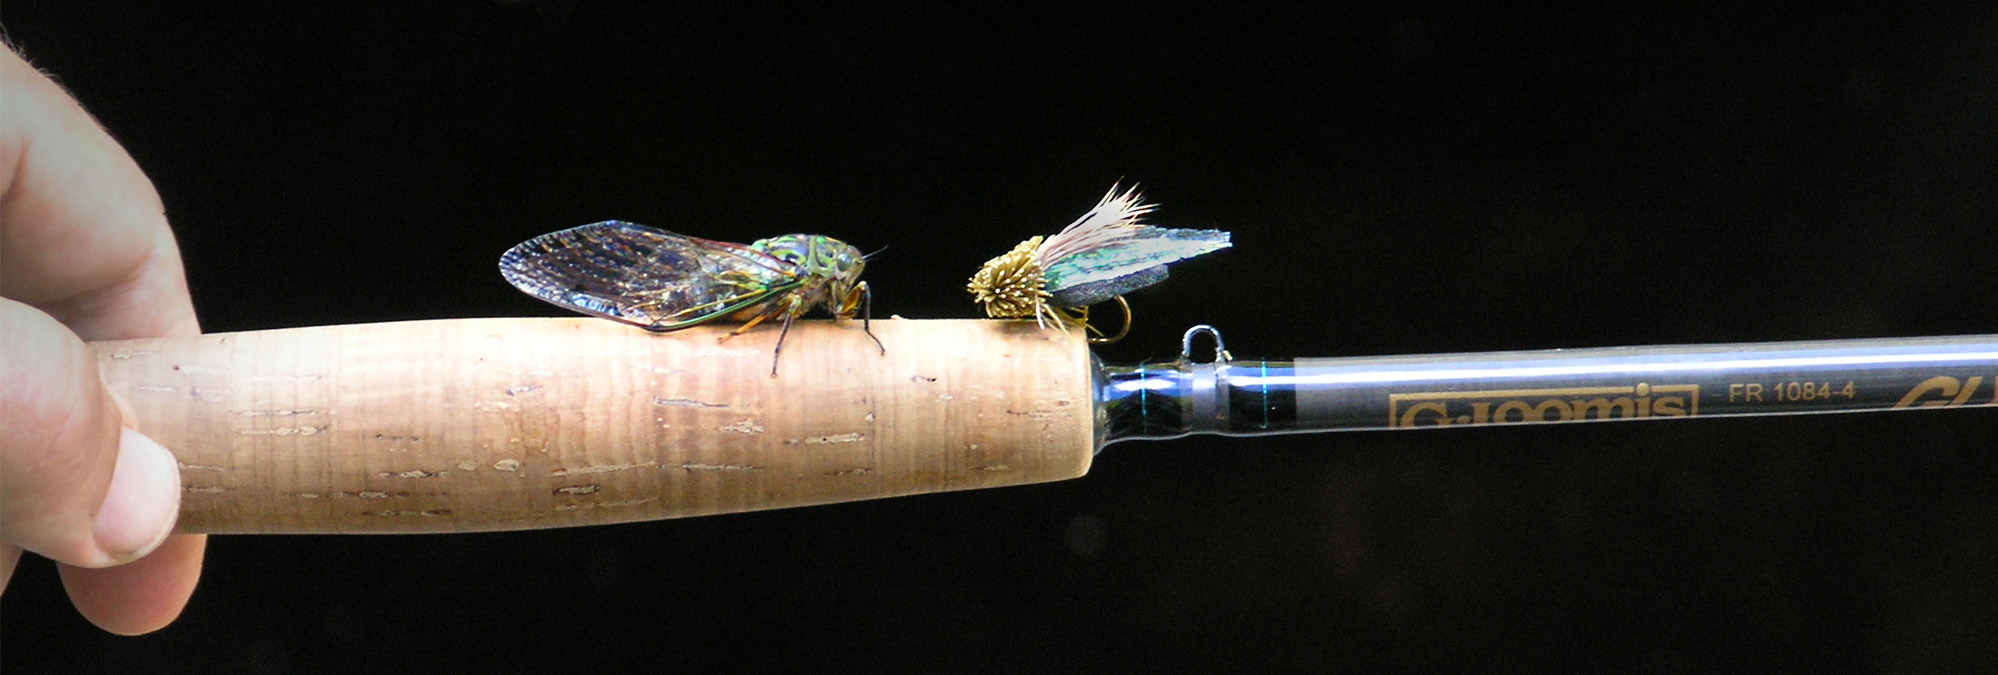 https://silverwaterfly.fishing/images/CICADA-FLY-AND-CICADA-NATURAL-0N%20FLY-ROD-3.jpg